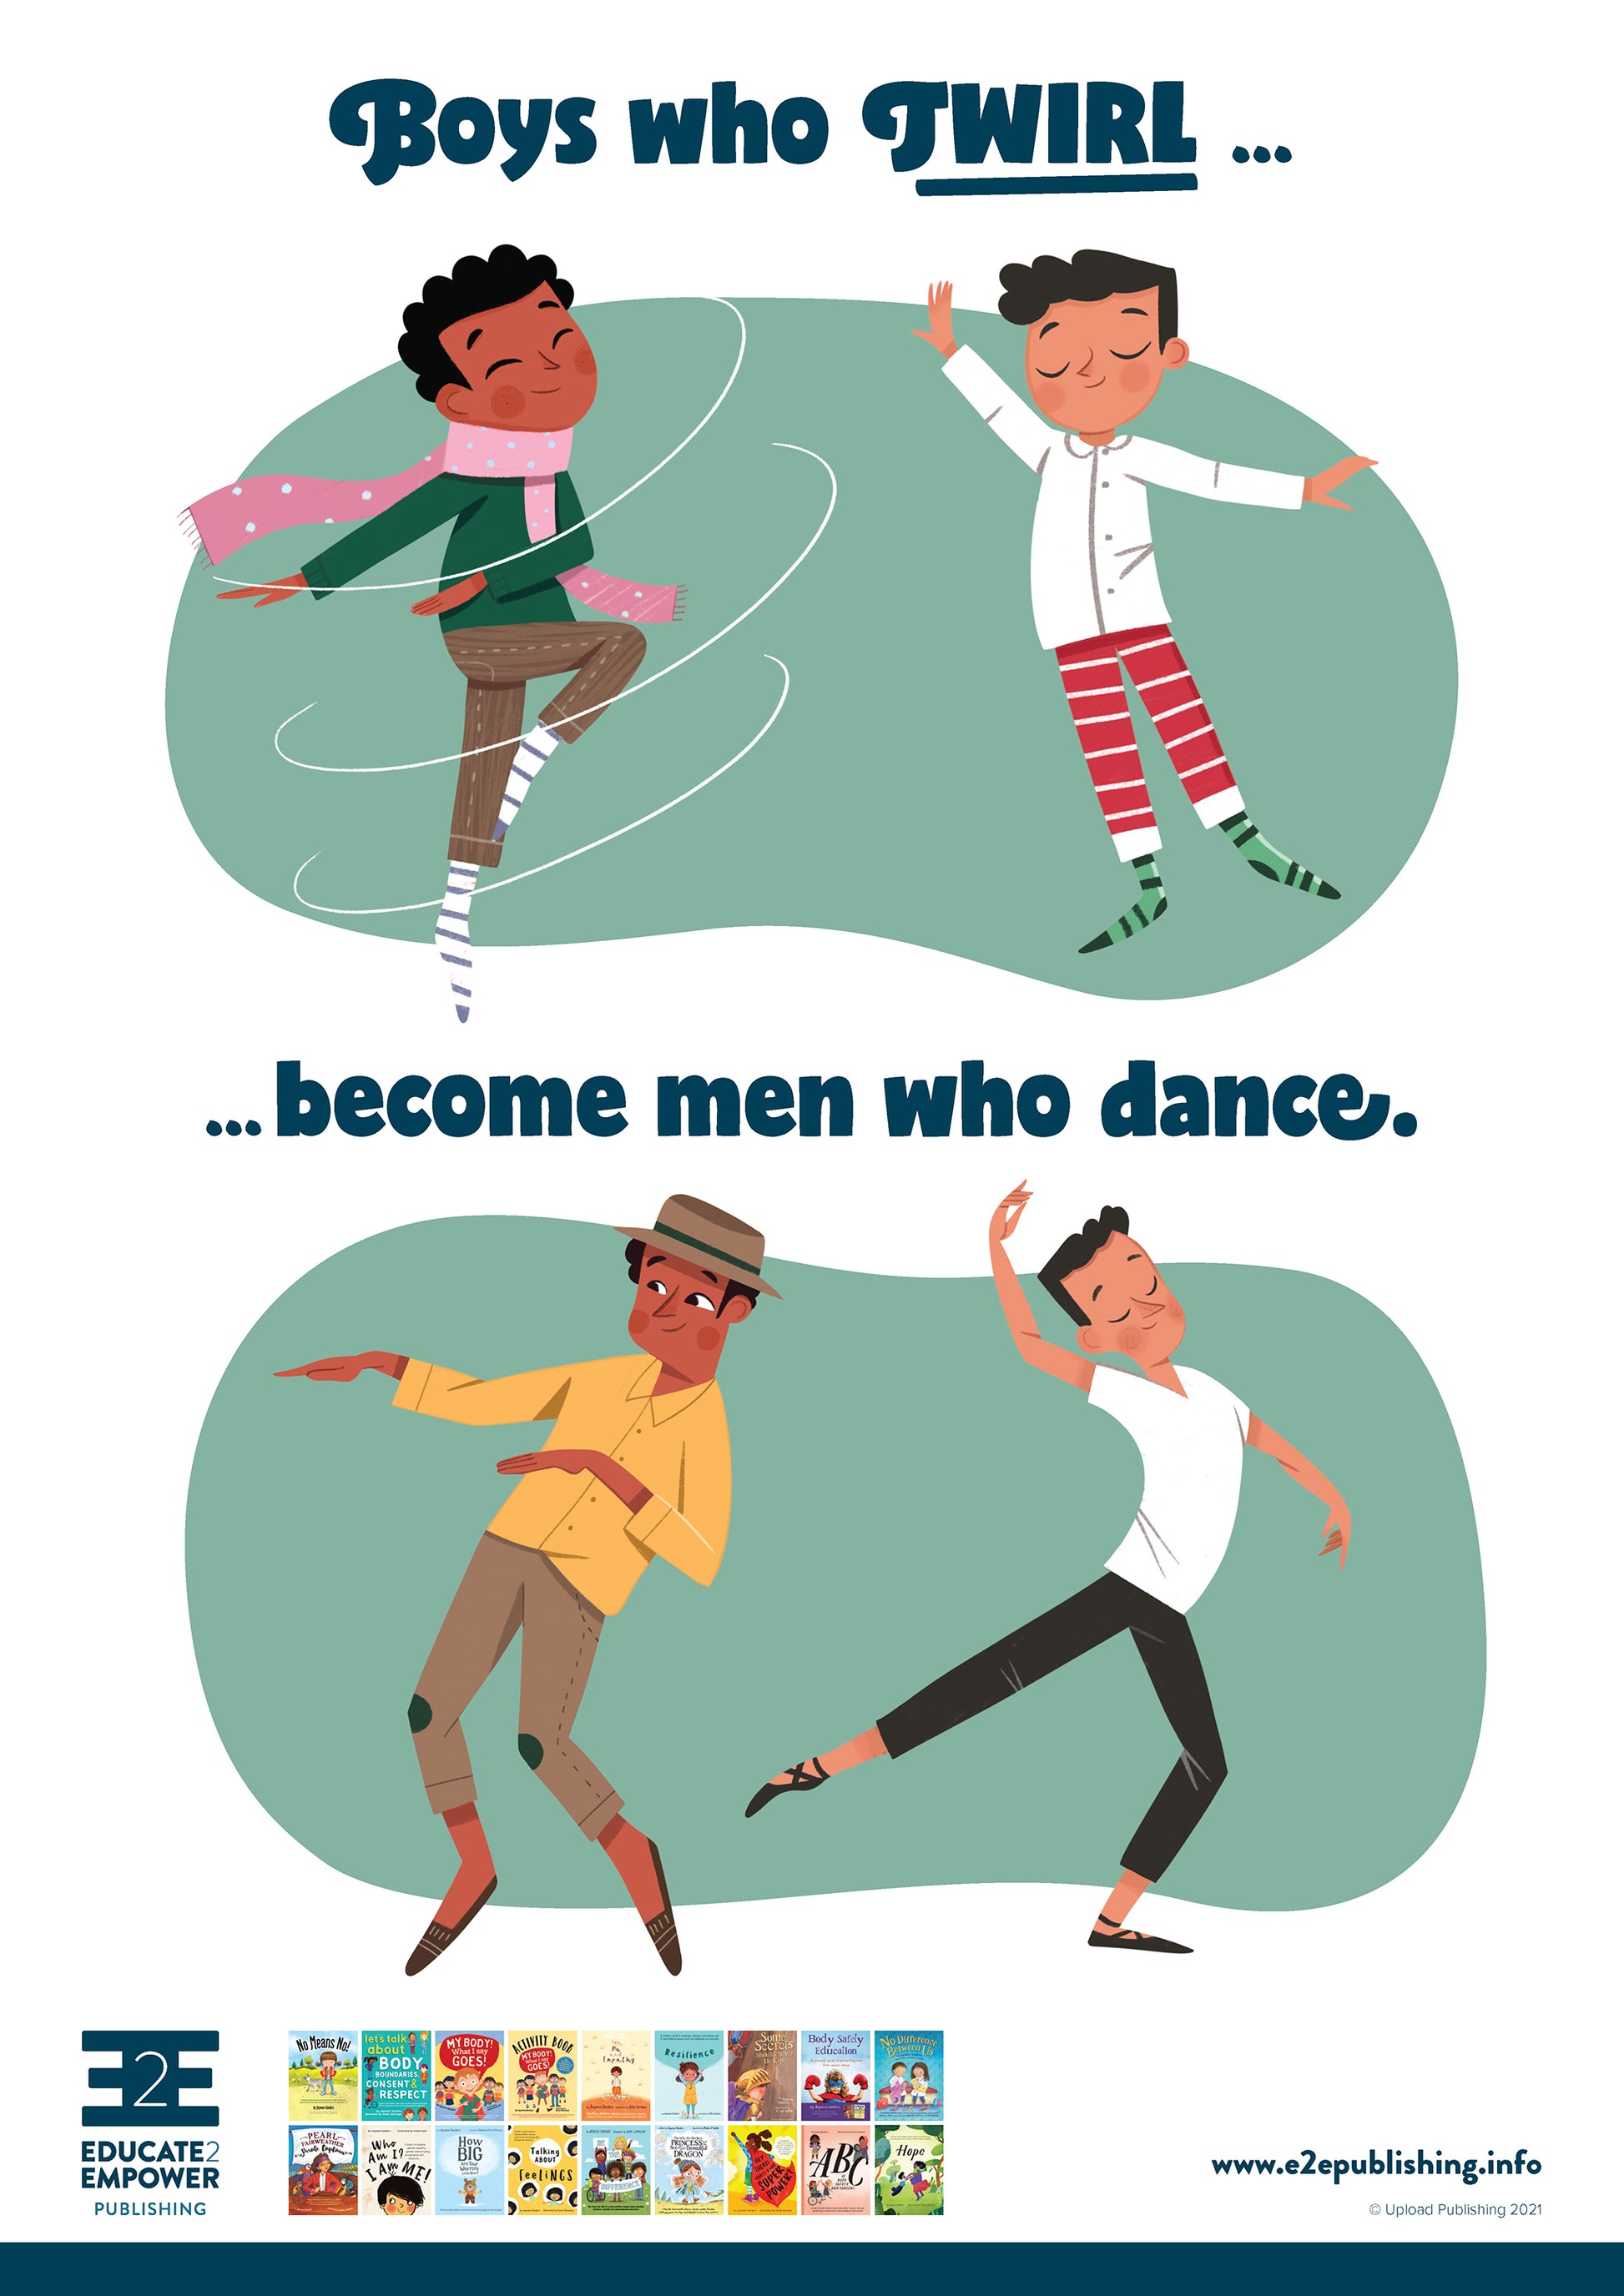 A poster for children titled 'Boys who twirl... become men who dance.' This is accompanied by a cartoon image of two young boys dancing. Below this the same boys are, as adults, working as professional dancers.